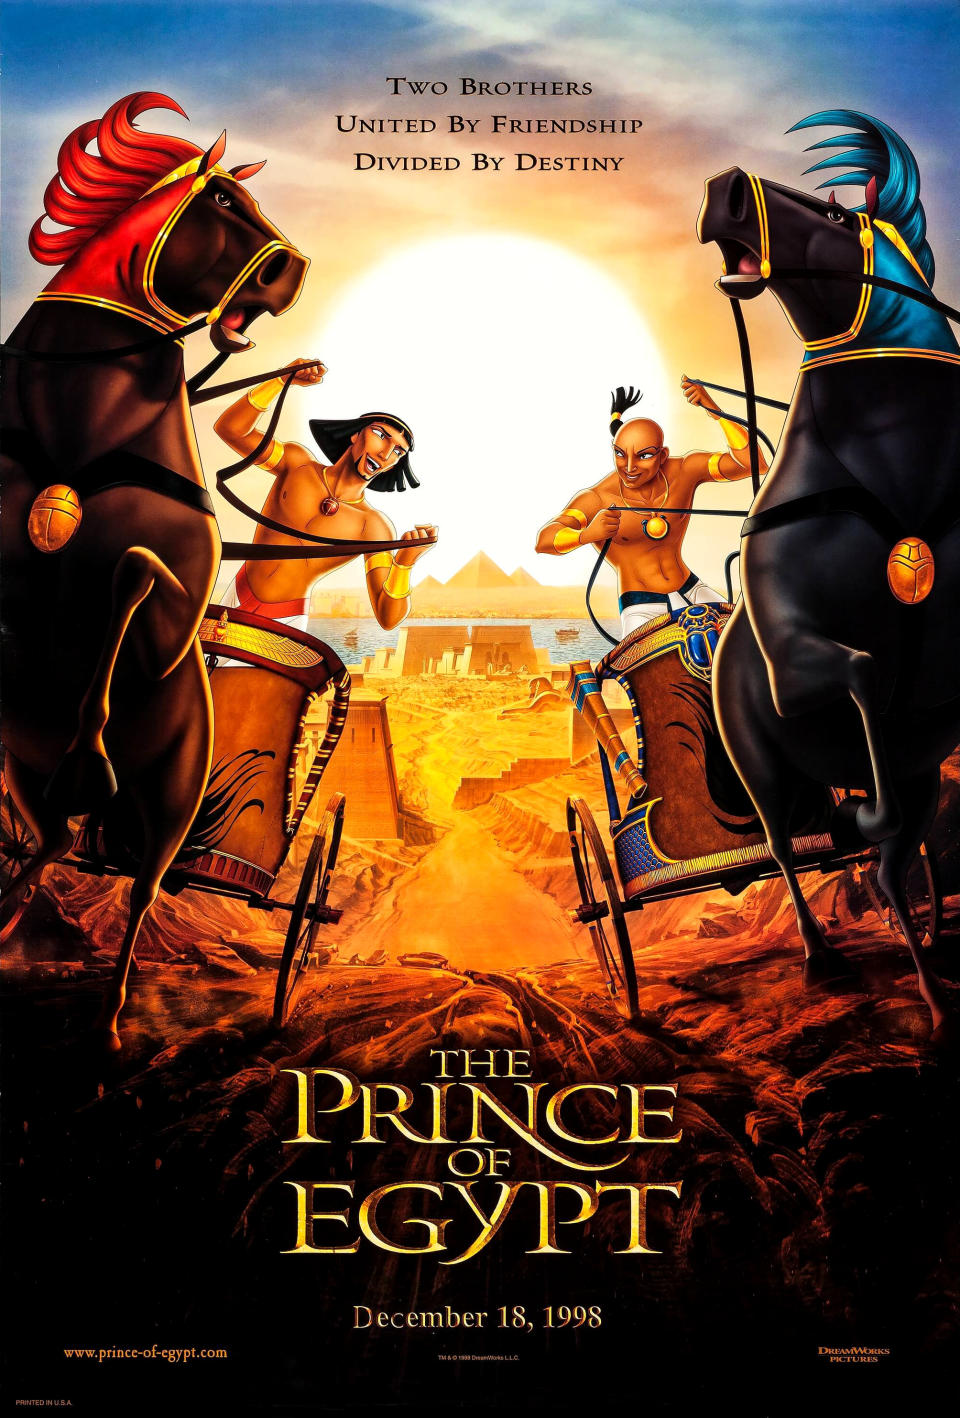 A poster for DreamWorks' 1998 animated film The Prince of Egypt. (DreamWorks)